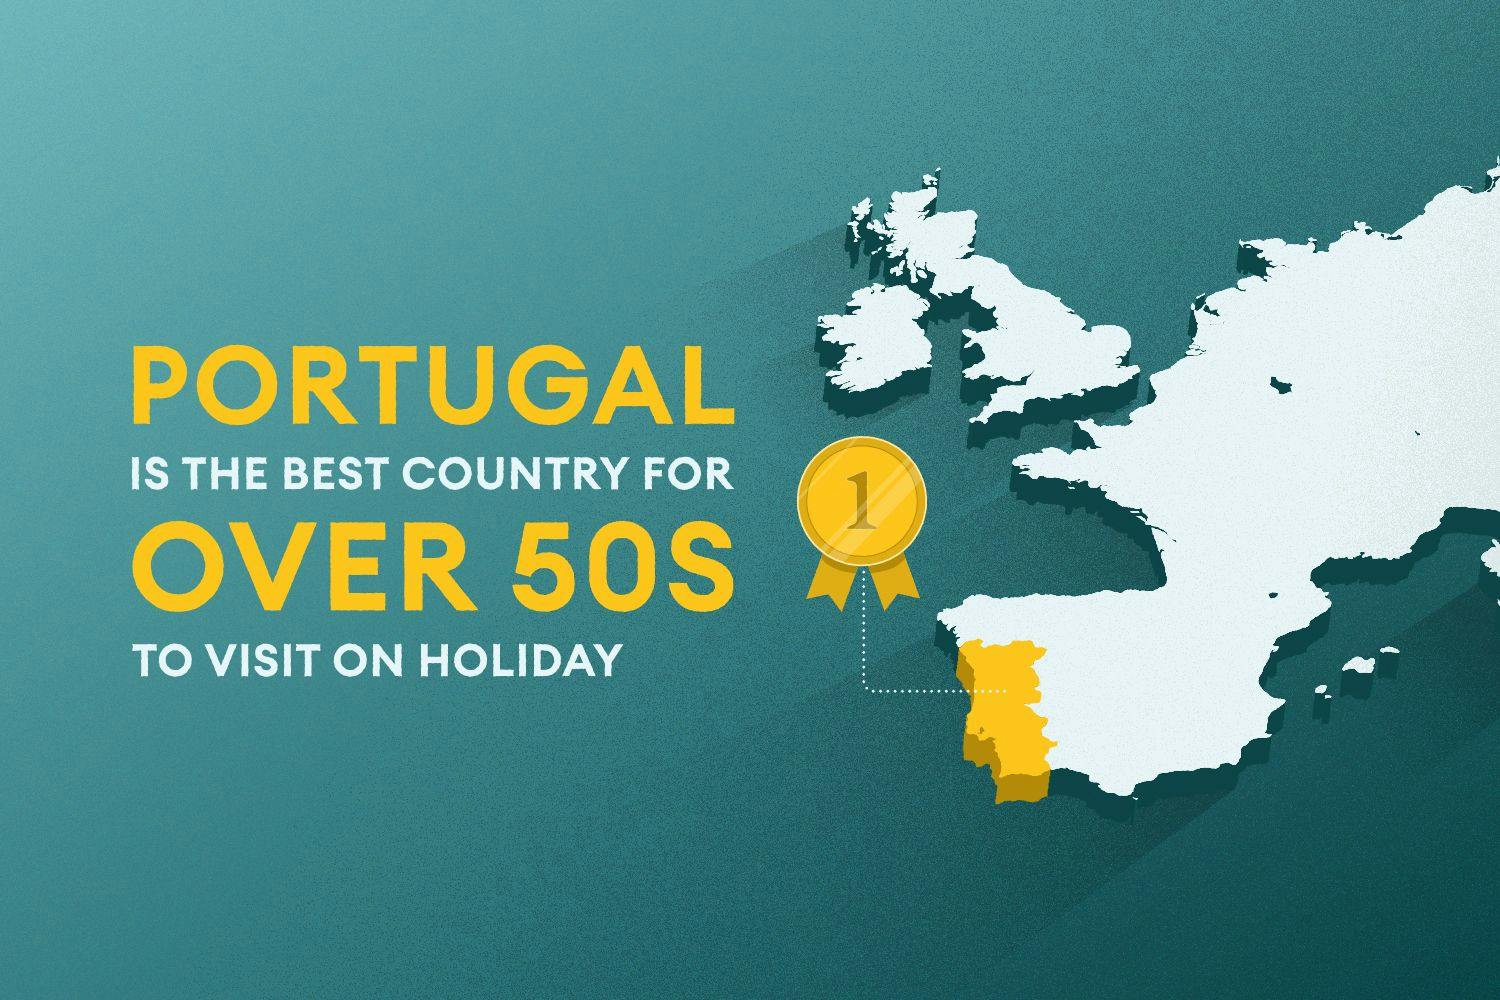 Portugal is the best country for over 50s to visit on holiday. Illustration of a map of Europe with Portugal highlighted. 